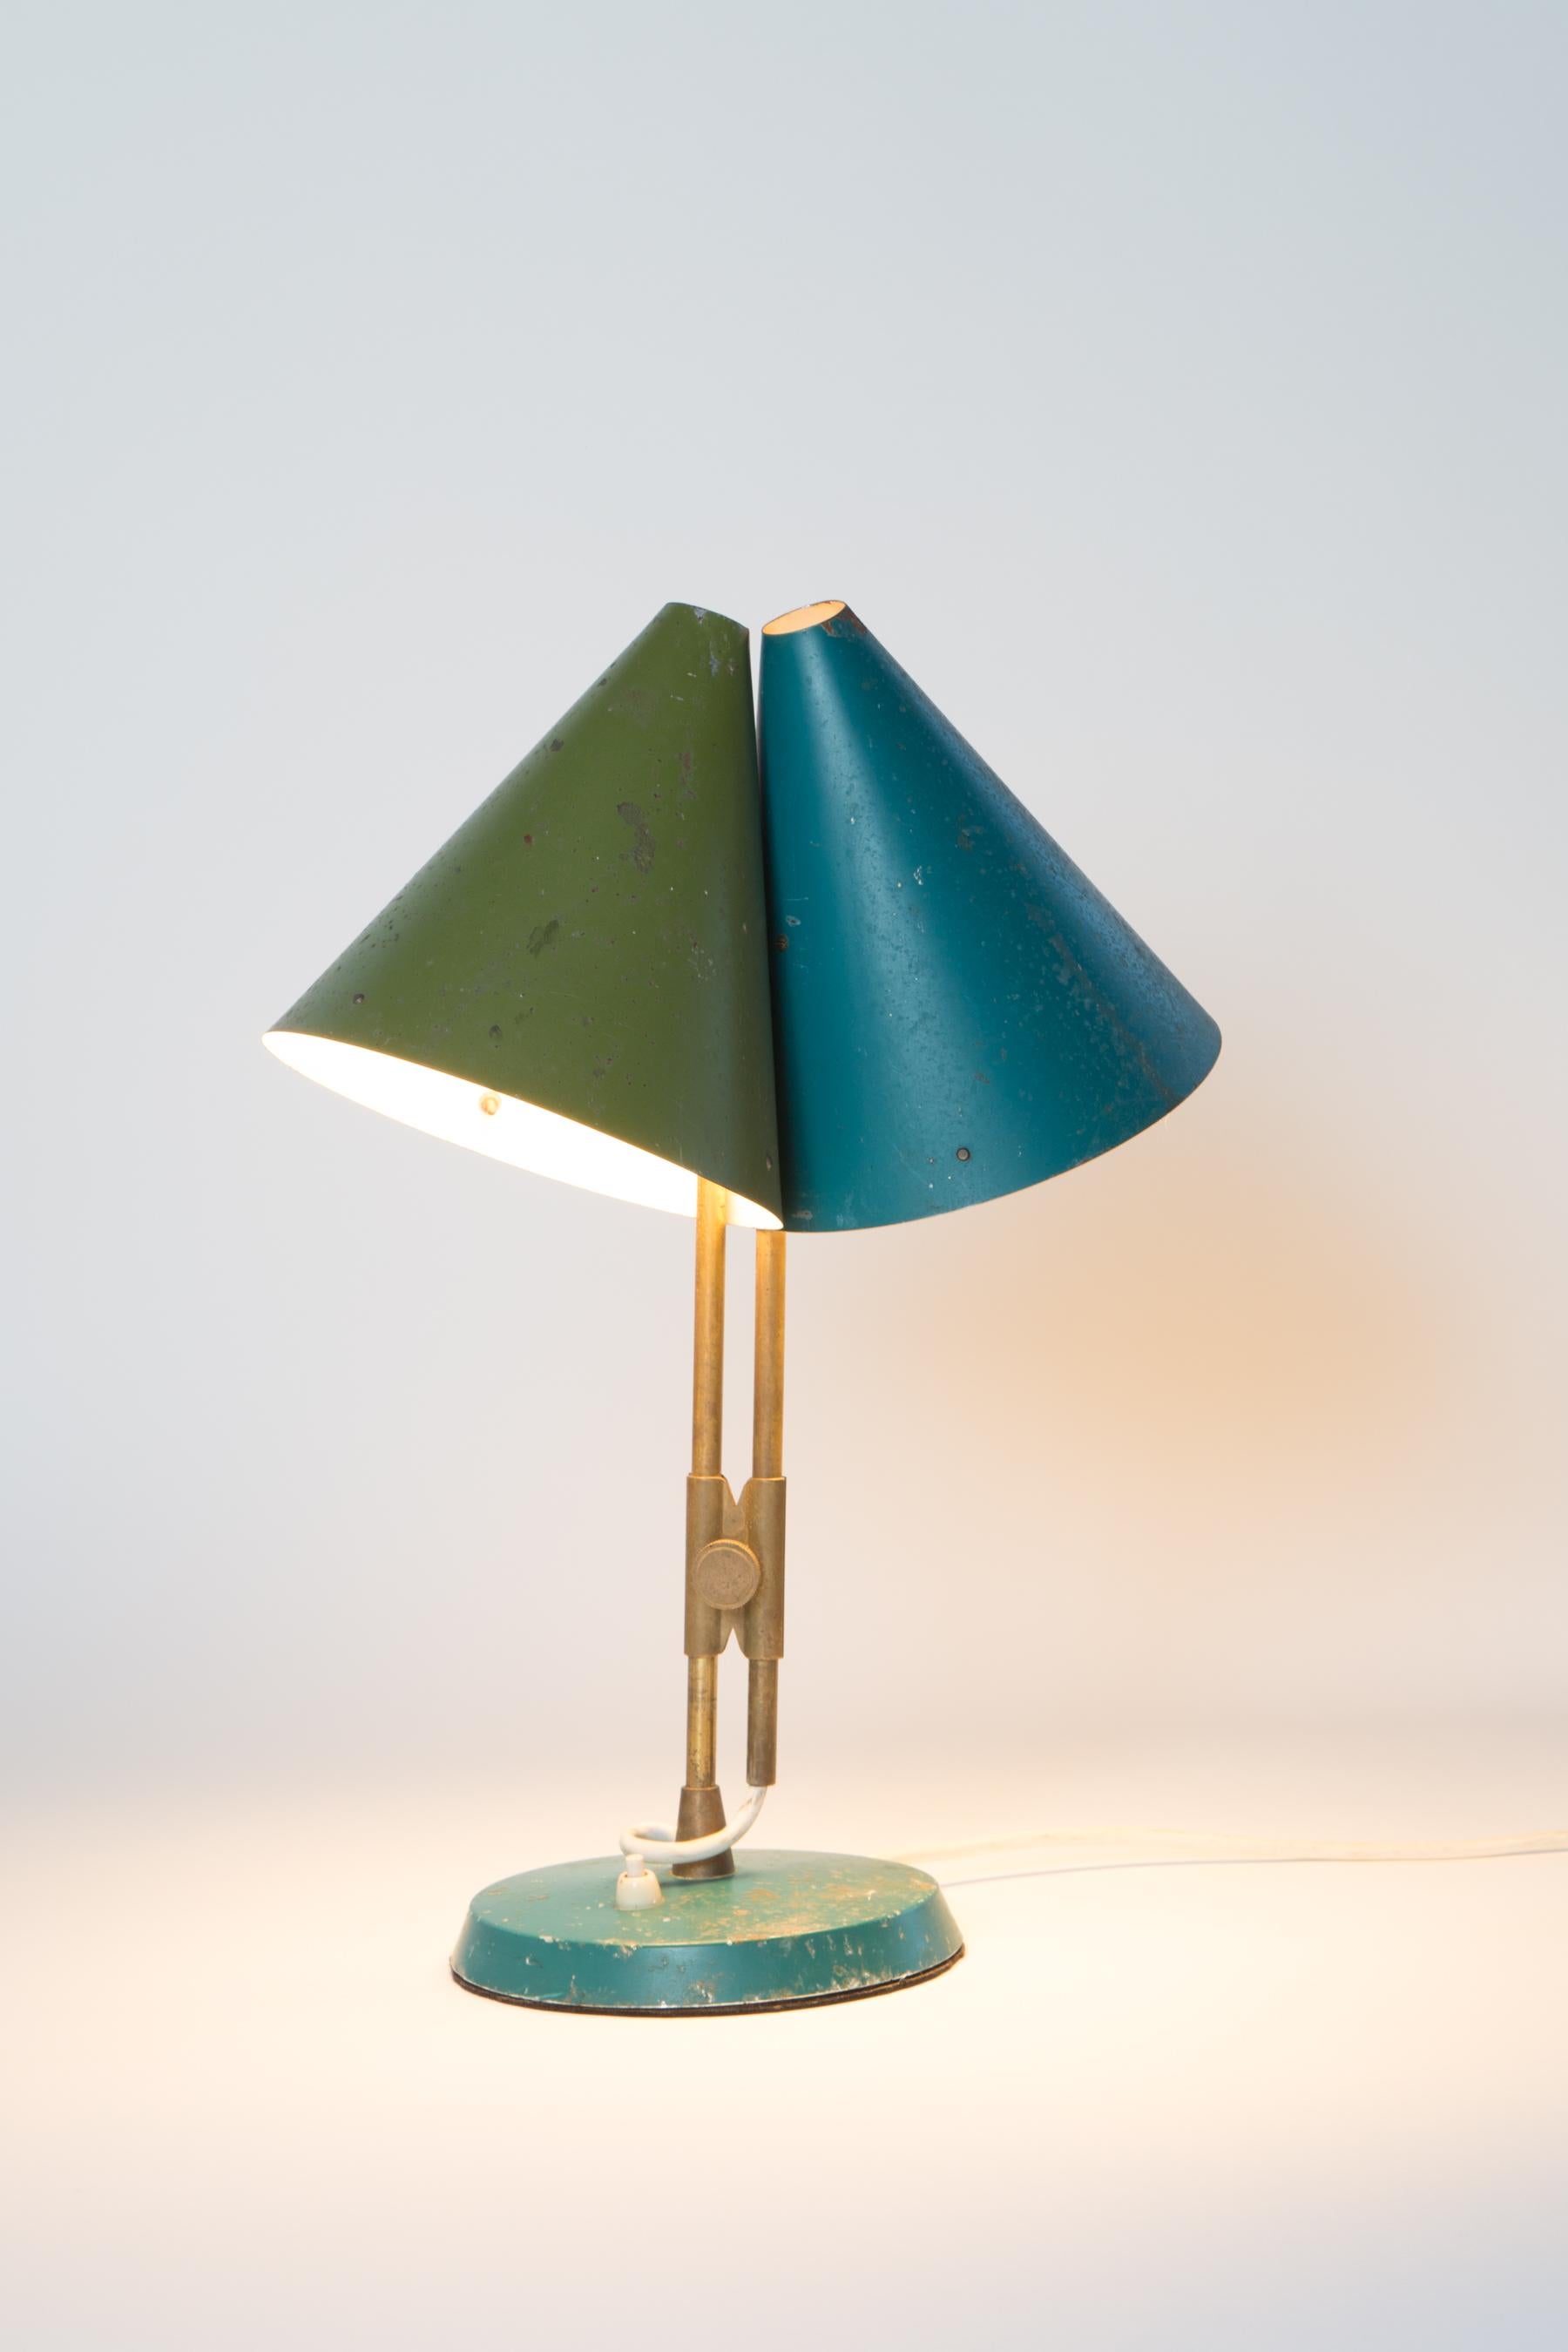 1959 Bent Karlby 'Mosaik' Adjustable Brass & Lacquered Metal Table Lamp for Lyfa 8